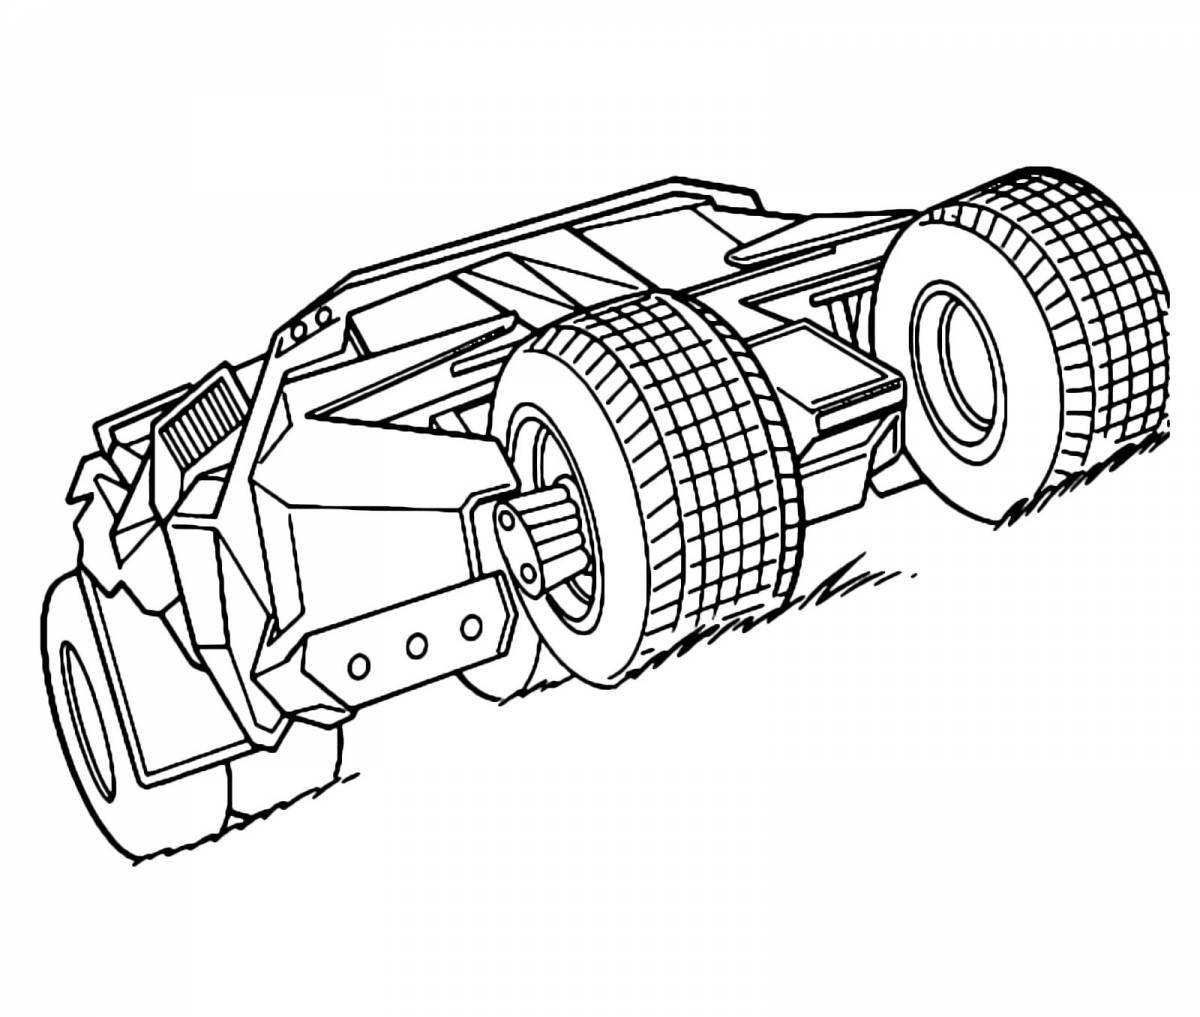 Exciting remote control car coloring page